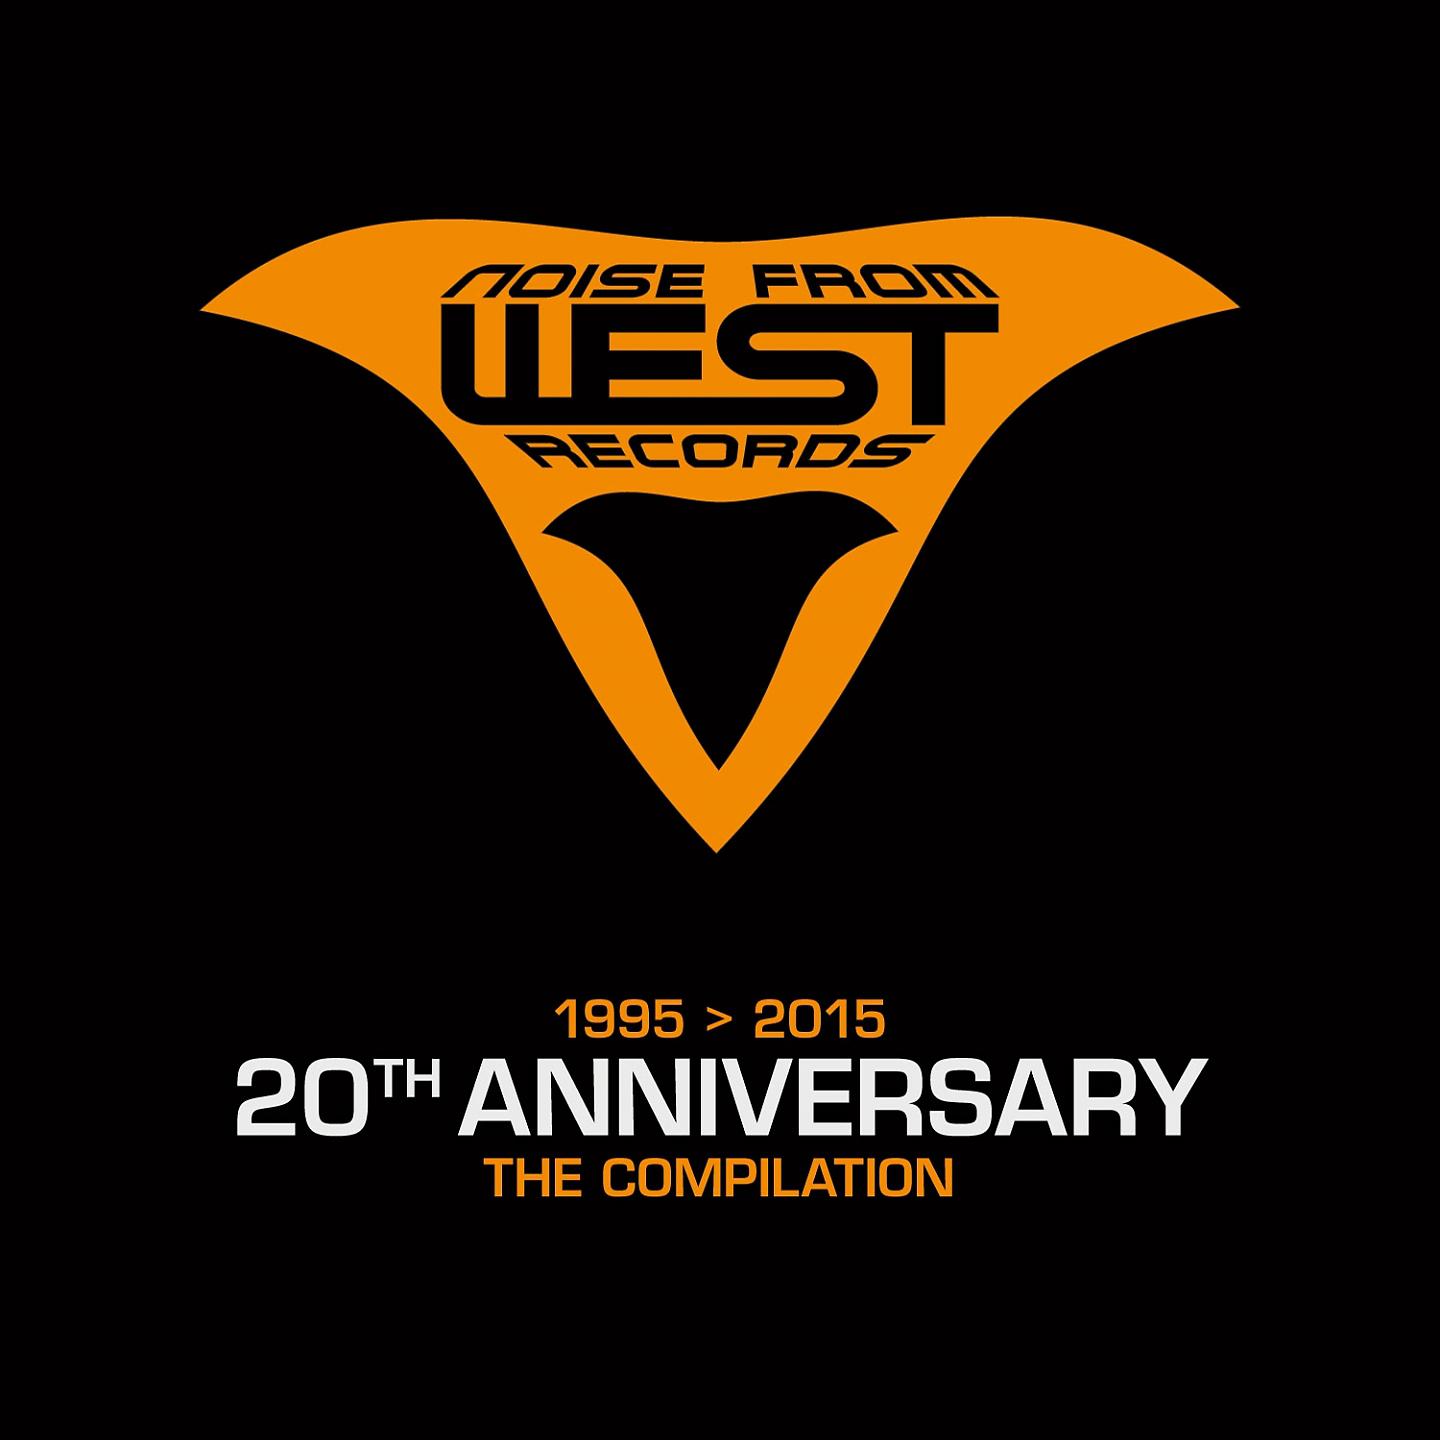 Постер альбома Noise From West Records 1995 - 2015 20Th Anniversary